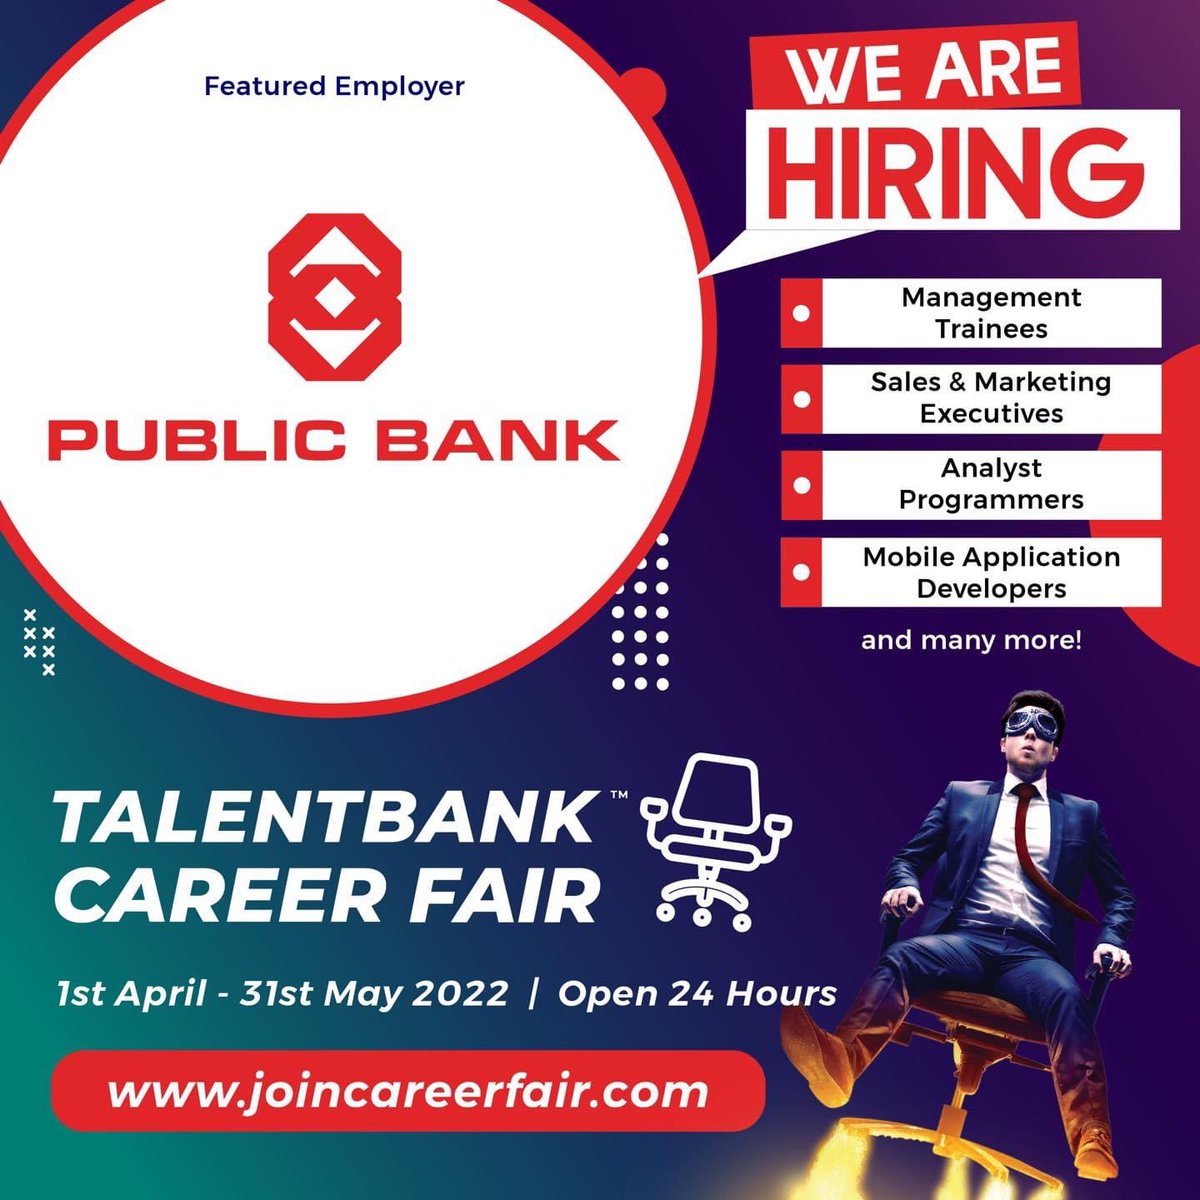 Begin your new career journey with Public Bank! Head over to our virtual booth at Talentbank Digital Career Fair 5.0 from 1 April 2022 to 31 May 2022 to discover more exciting opportunities! See you there! #PublicBankCareers #jobsviral #Hiring @Kerjacarirezeki @MYFJOfficial